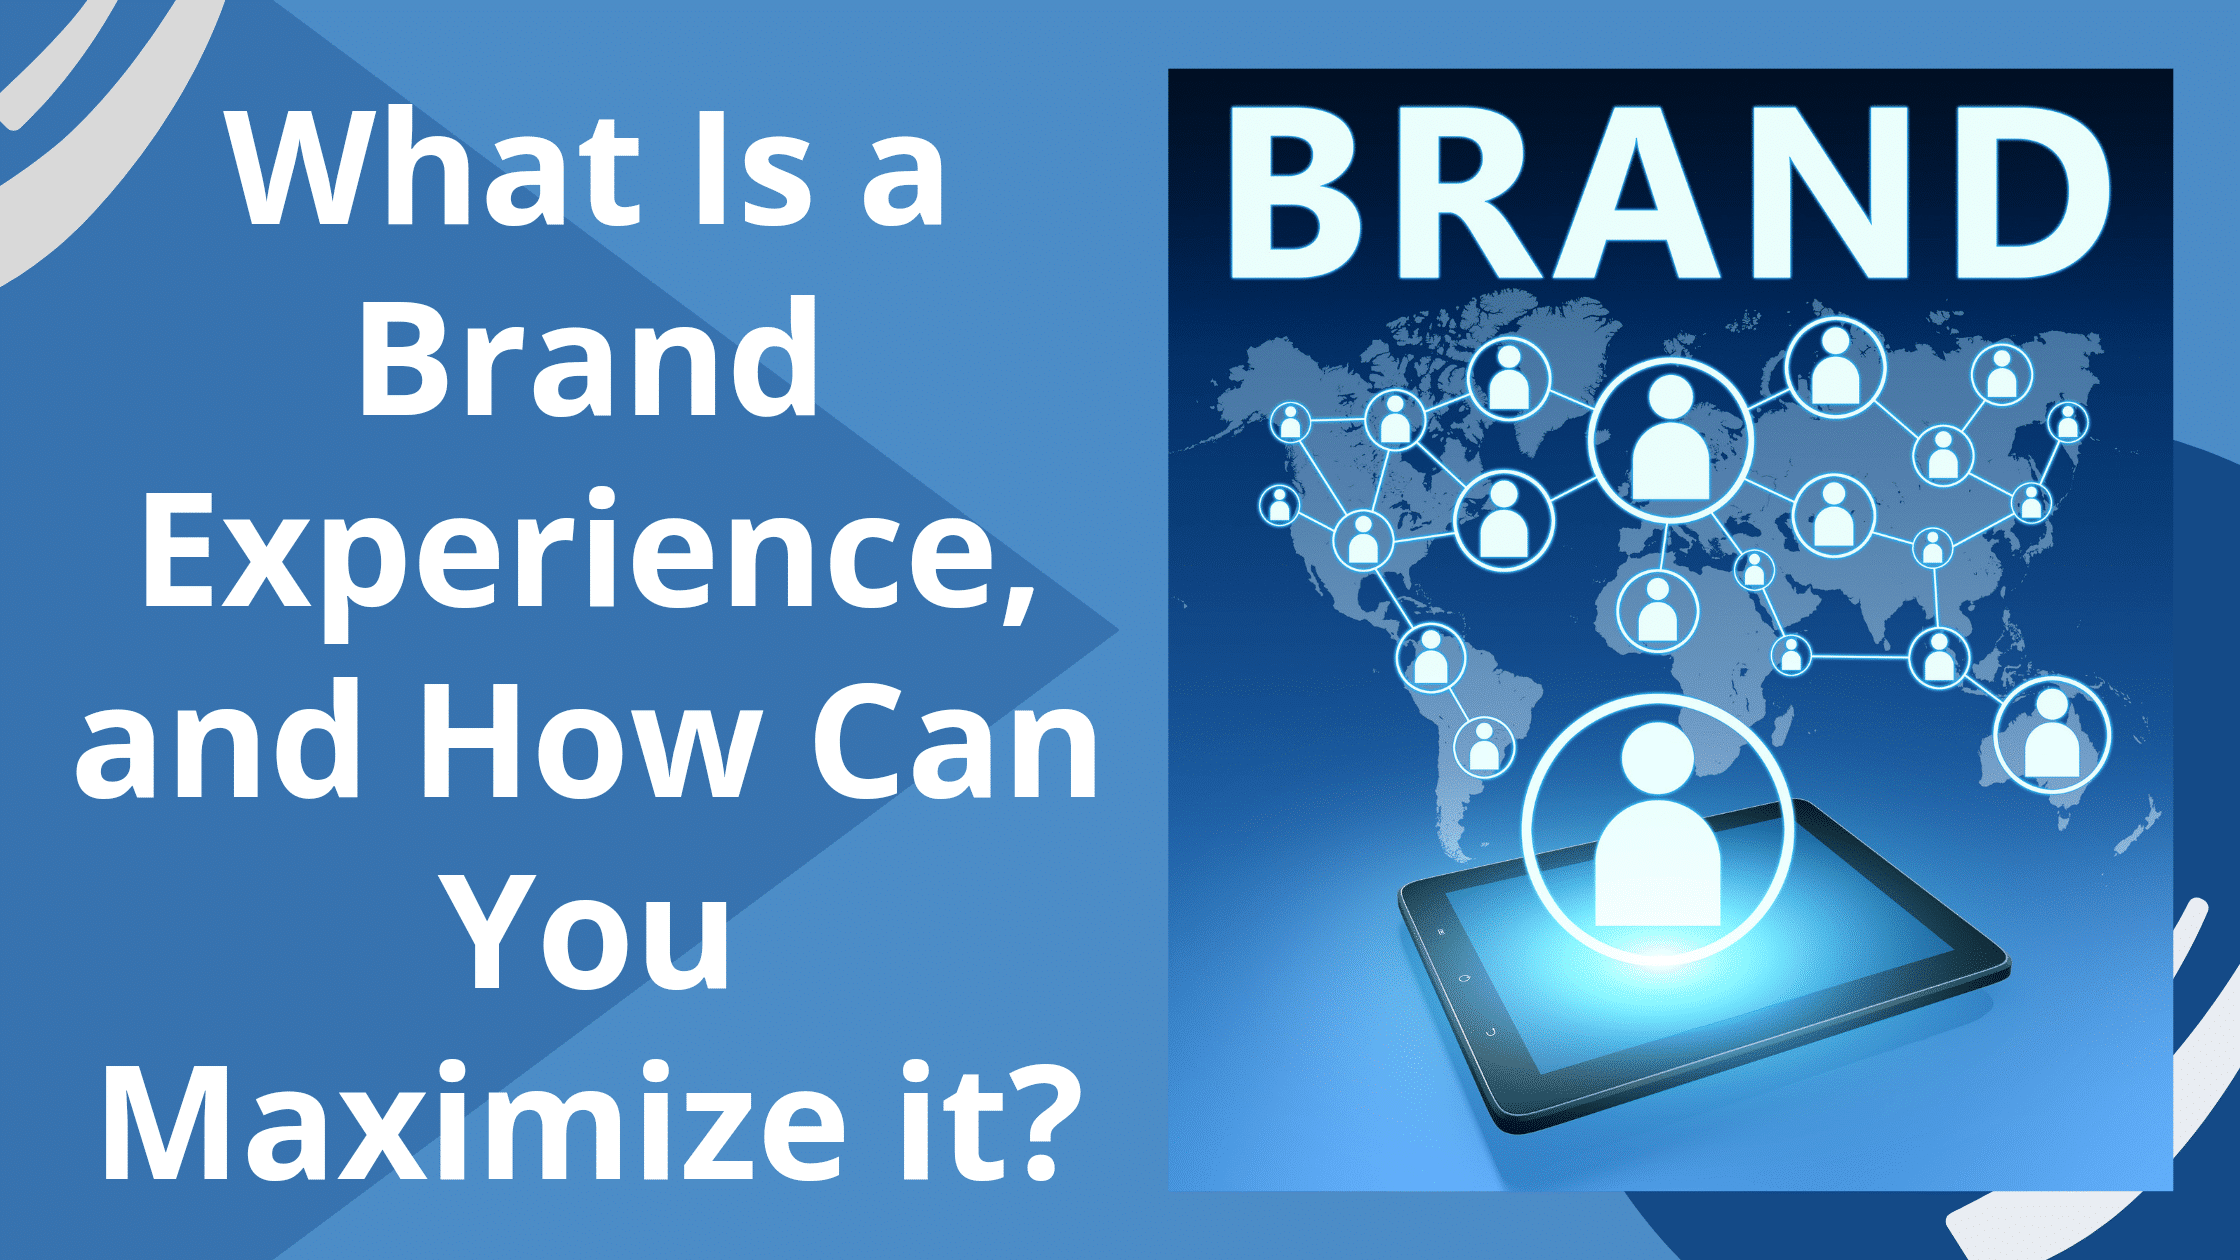 What Is a Brand Experience, and How Can You Maximize It?